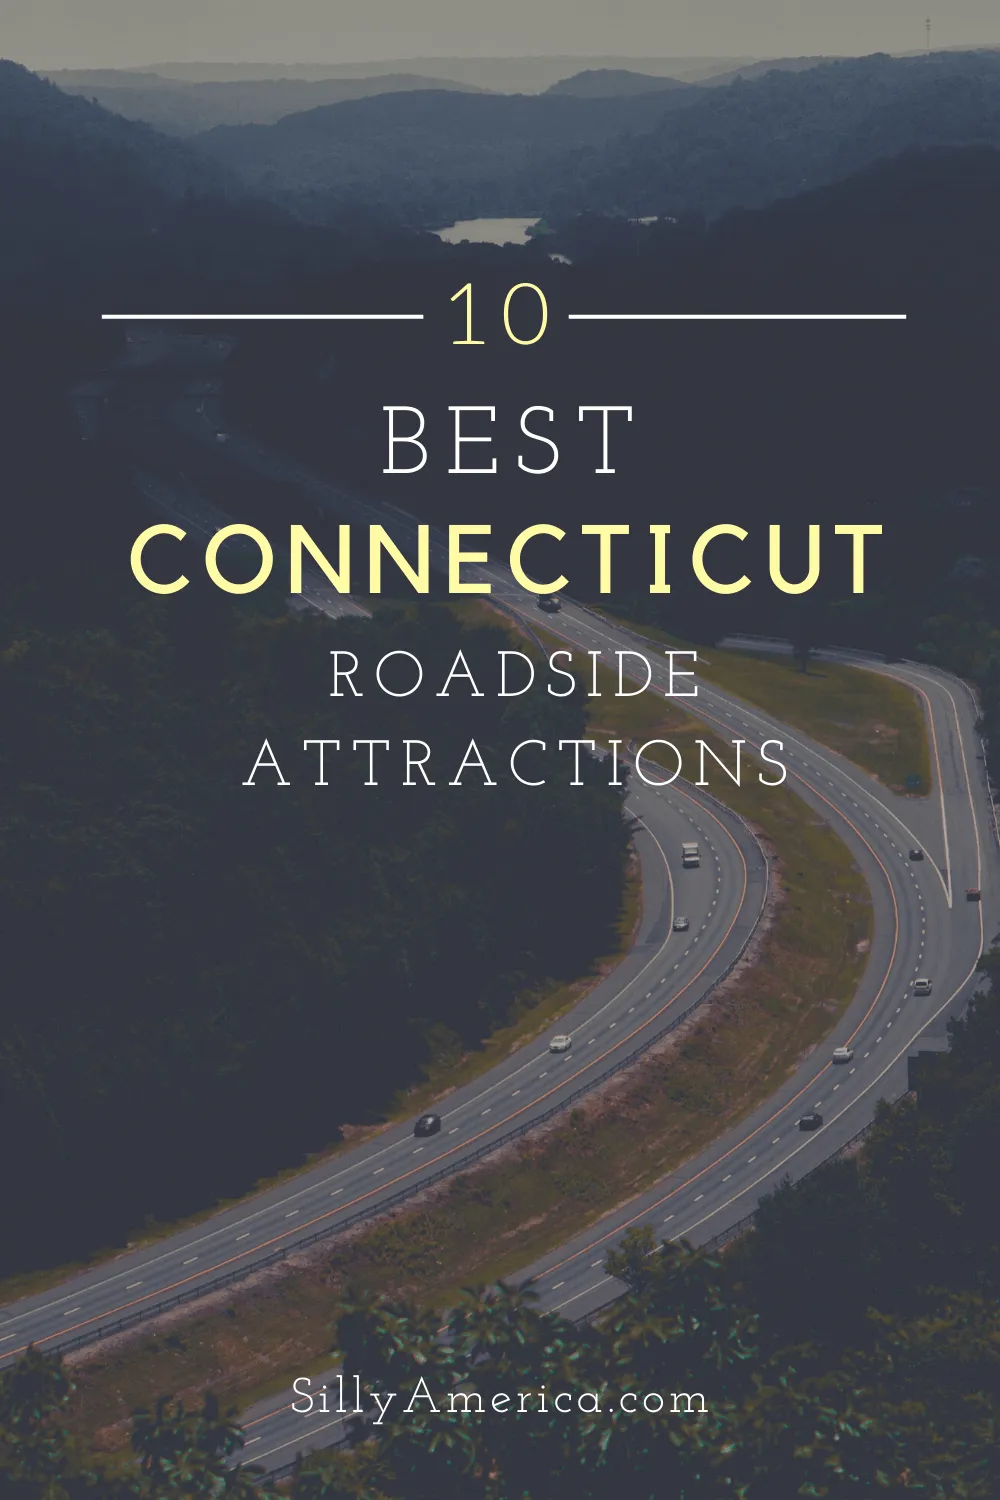 The best Connecticut roadside attractions to visit on a Connecticut road trip. Add these roadside oddities to your travel bucket list, itinerary, or route map! Fun road trip stops for kids or adults! #ConnecticutRoadsideAttractions #ConnecticutRoadsideAttraction #RoadsideAttractions #RoadsideAttraction #ConnecticutRoadTrip #ConnecticutRoadTripItinerary #RoadTrip #WeirdRoadsideAttractions